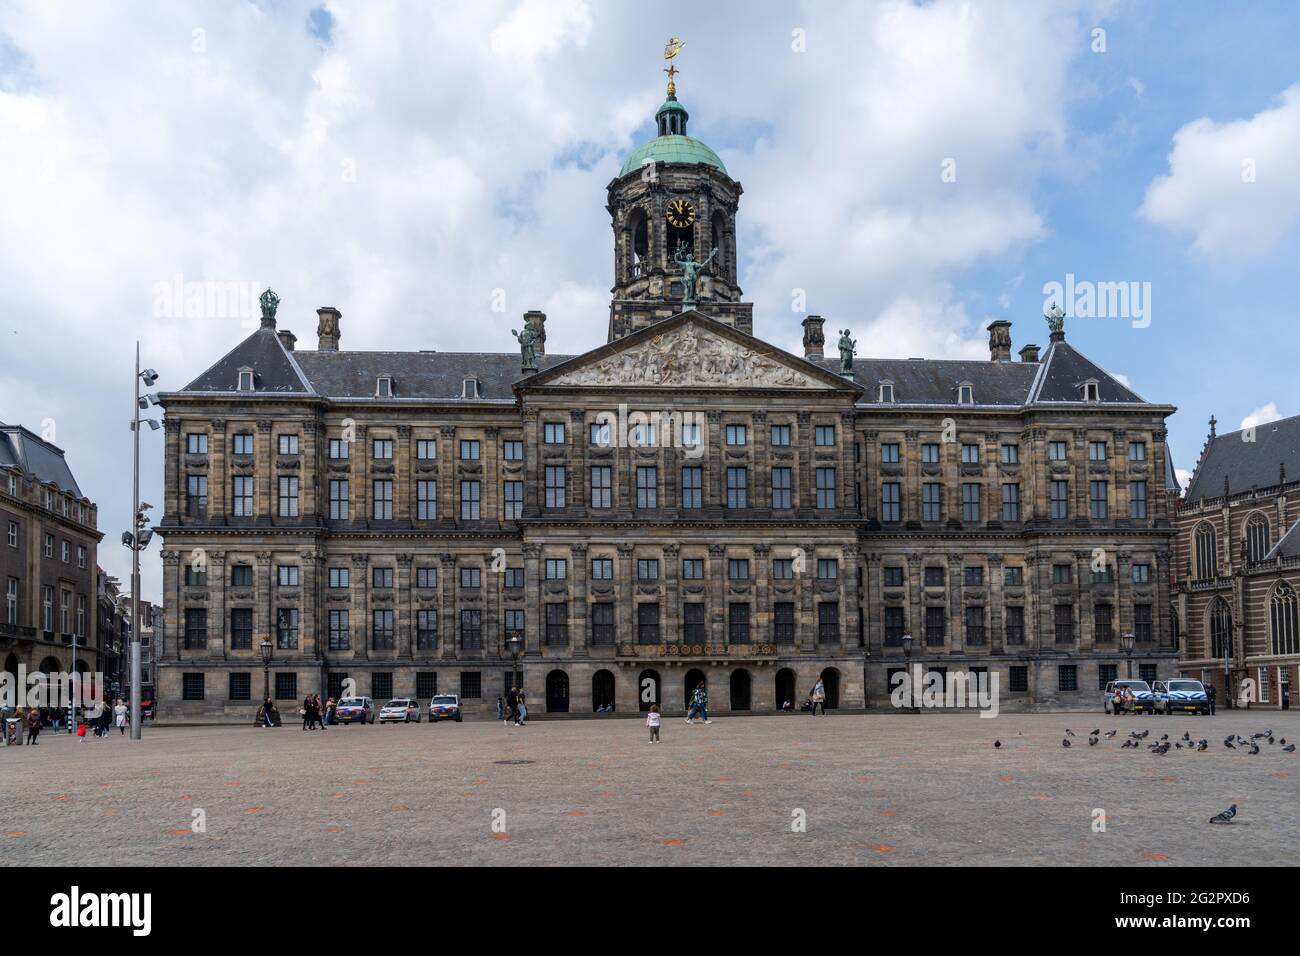 Amsterdam, Netherlands - 19 May, 2021: view of the Royal Palace in downtown Amsterdam Stock Photo